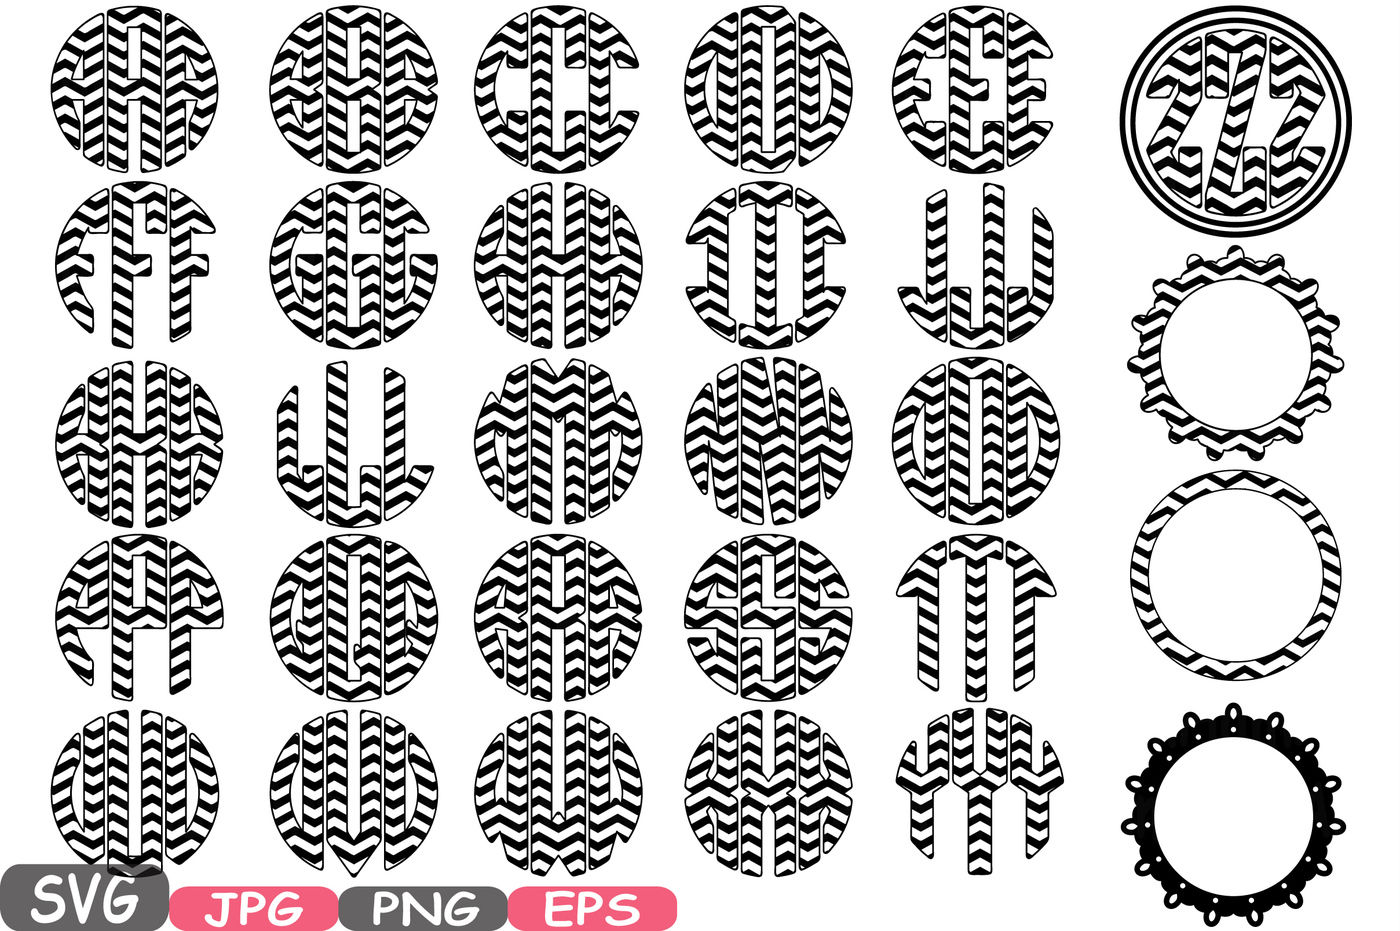 Download Stripes Circle Alphabet Svg Silhouette Letters Abc Cutting Files Sign Icons Cricut Design Cameo Vinyl Monogram Clipart 585s By Hamhamart Thehungryjpeg Com